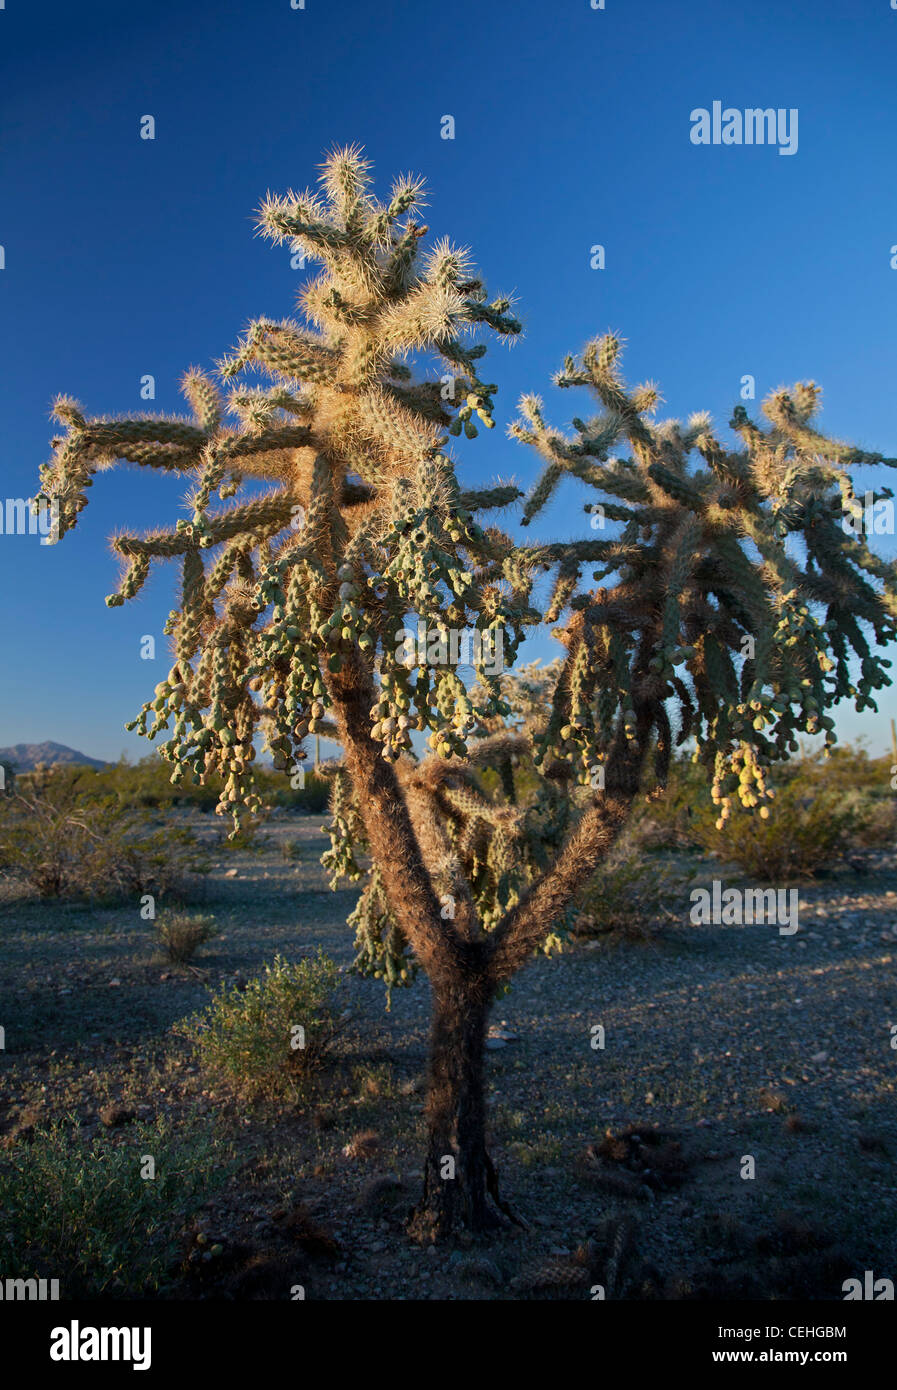 Ajo, Arizona - Chain-fruit cholla cactus in Organ Pipe Cactus National Monument. This plant is also called the jumping cholla. Stock Photo